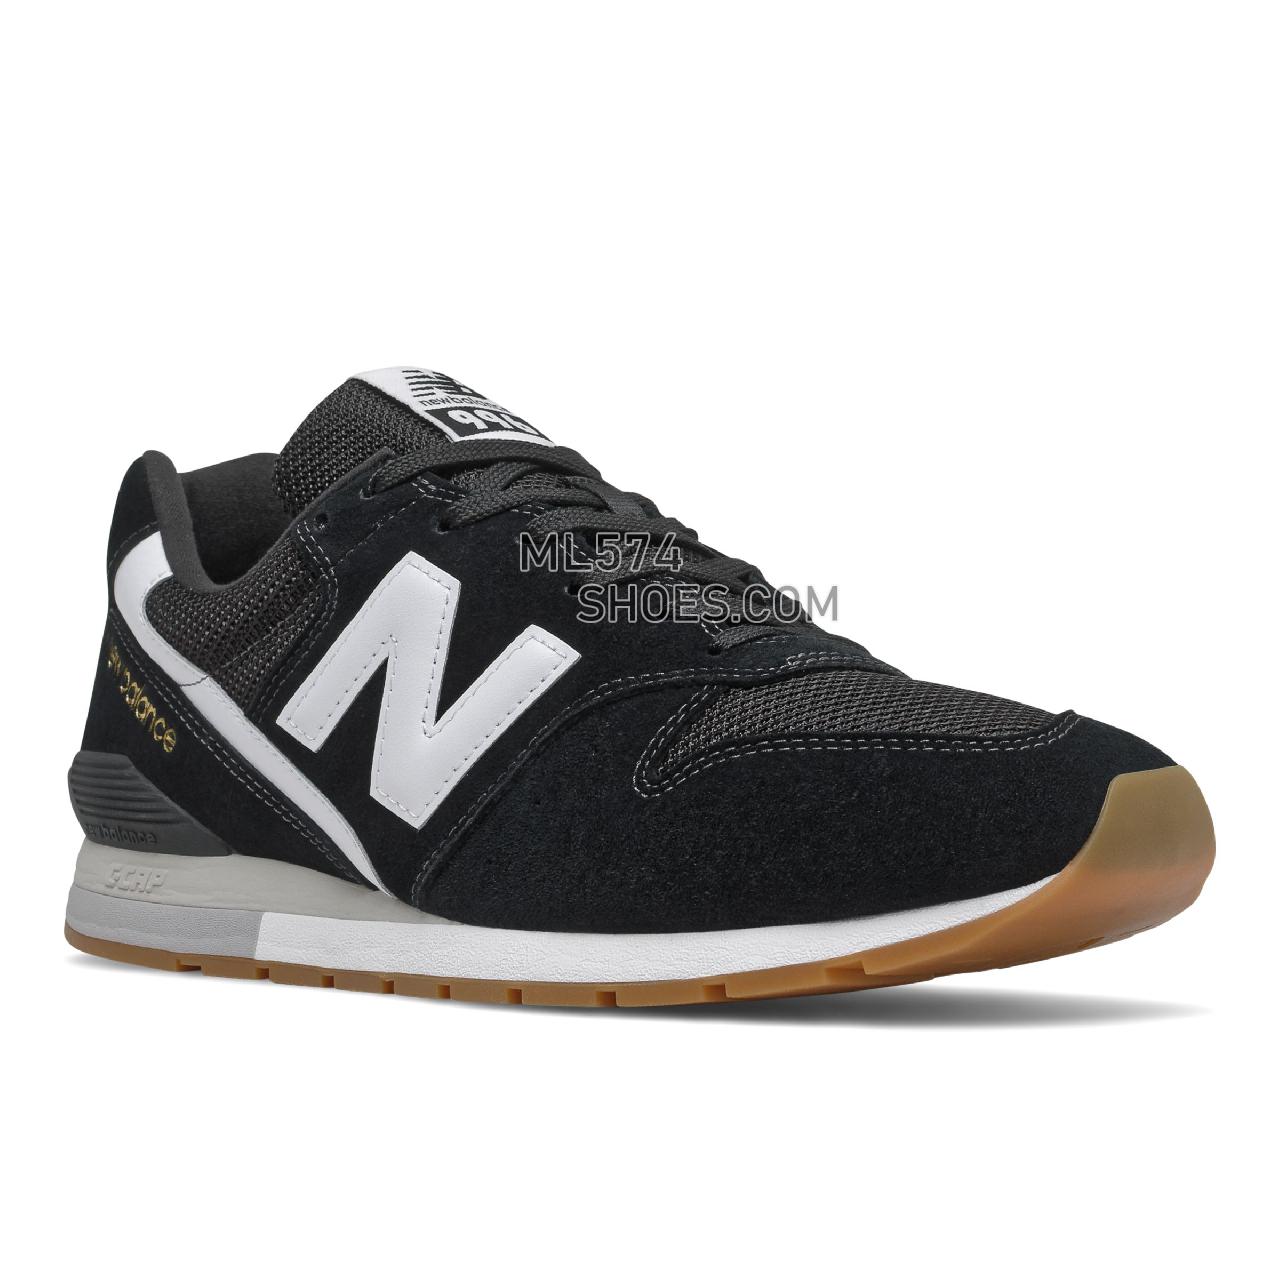 New Balance 996v2 - Men's Classic Sneakers - Black with White - CM996CPG